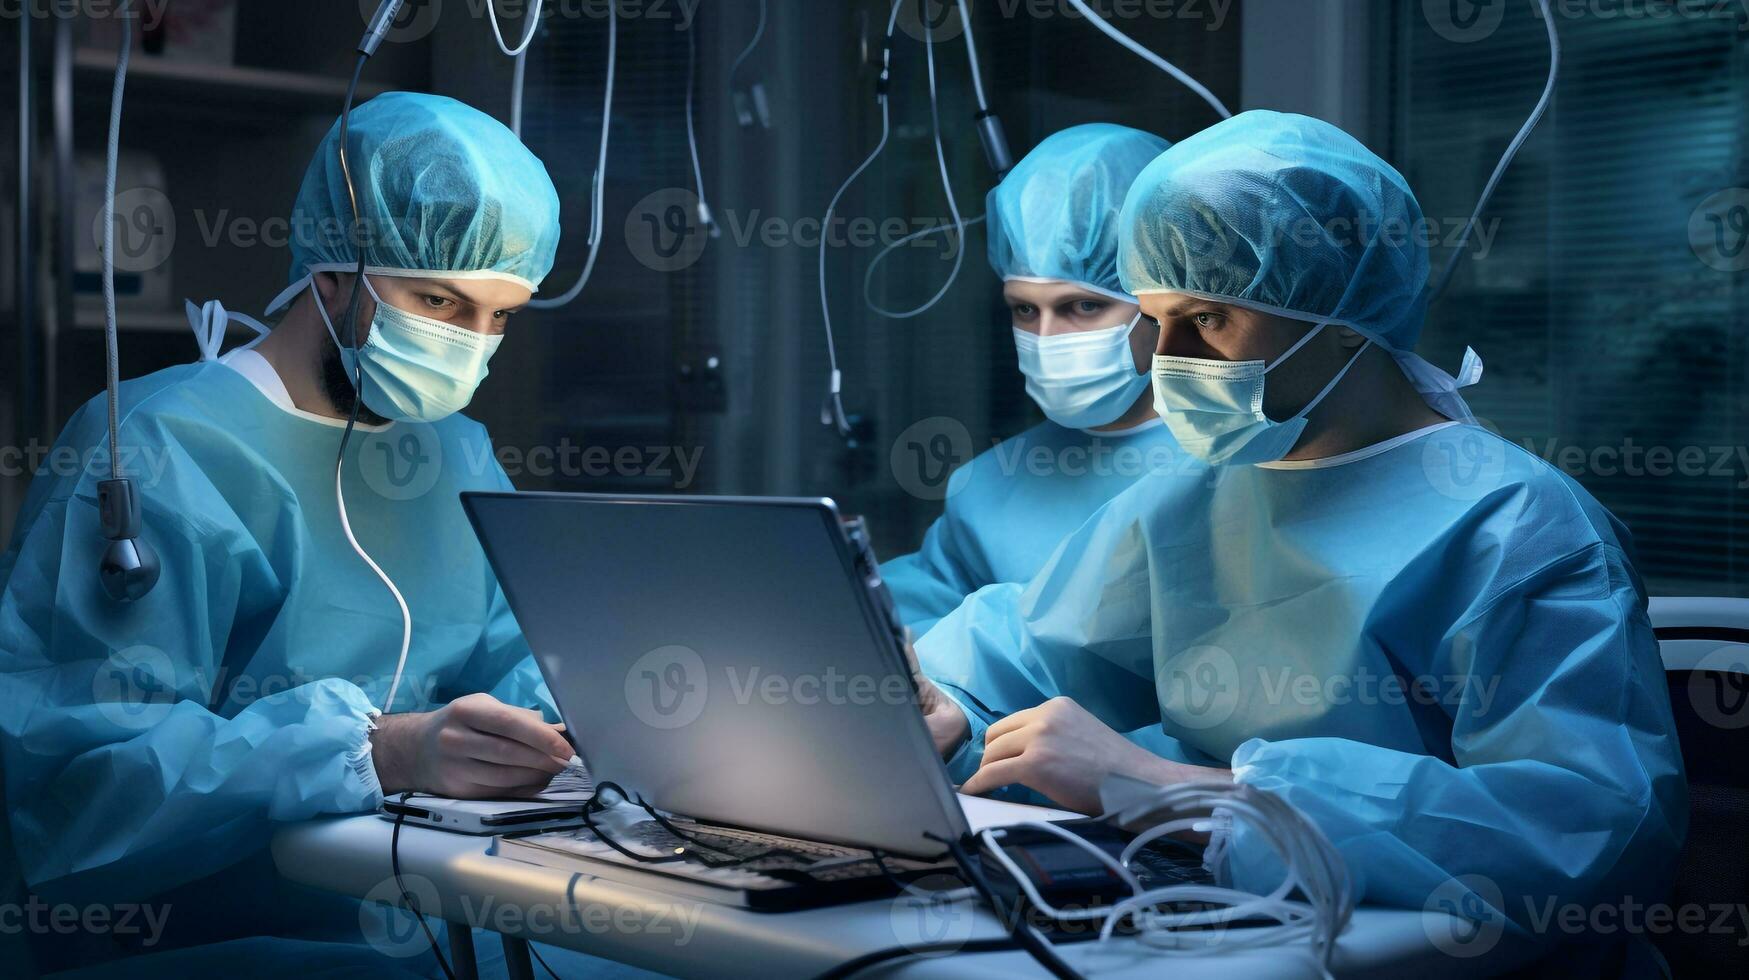 A pair of medical workers wear medical face masks over their laptops, medical stock images photo